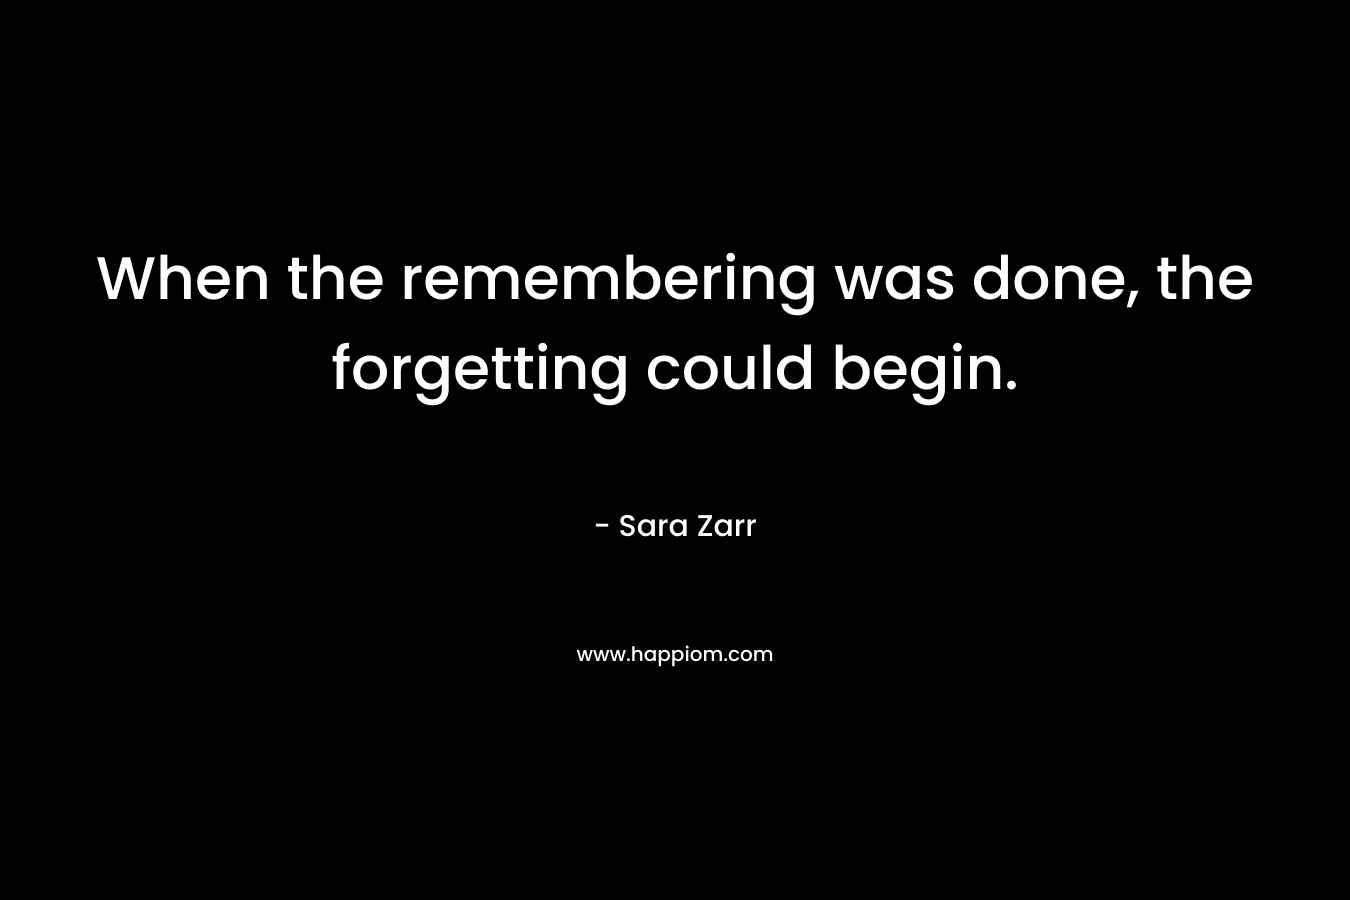 When the remembering was done, the forgetting could begin. – Sara Zarr